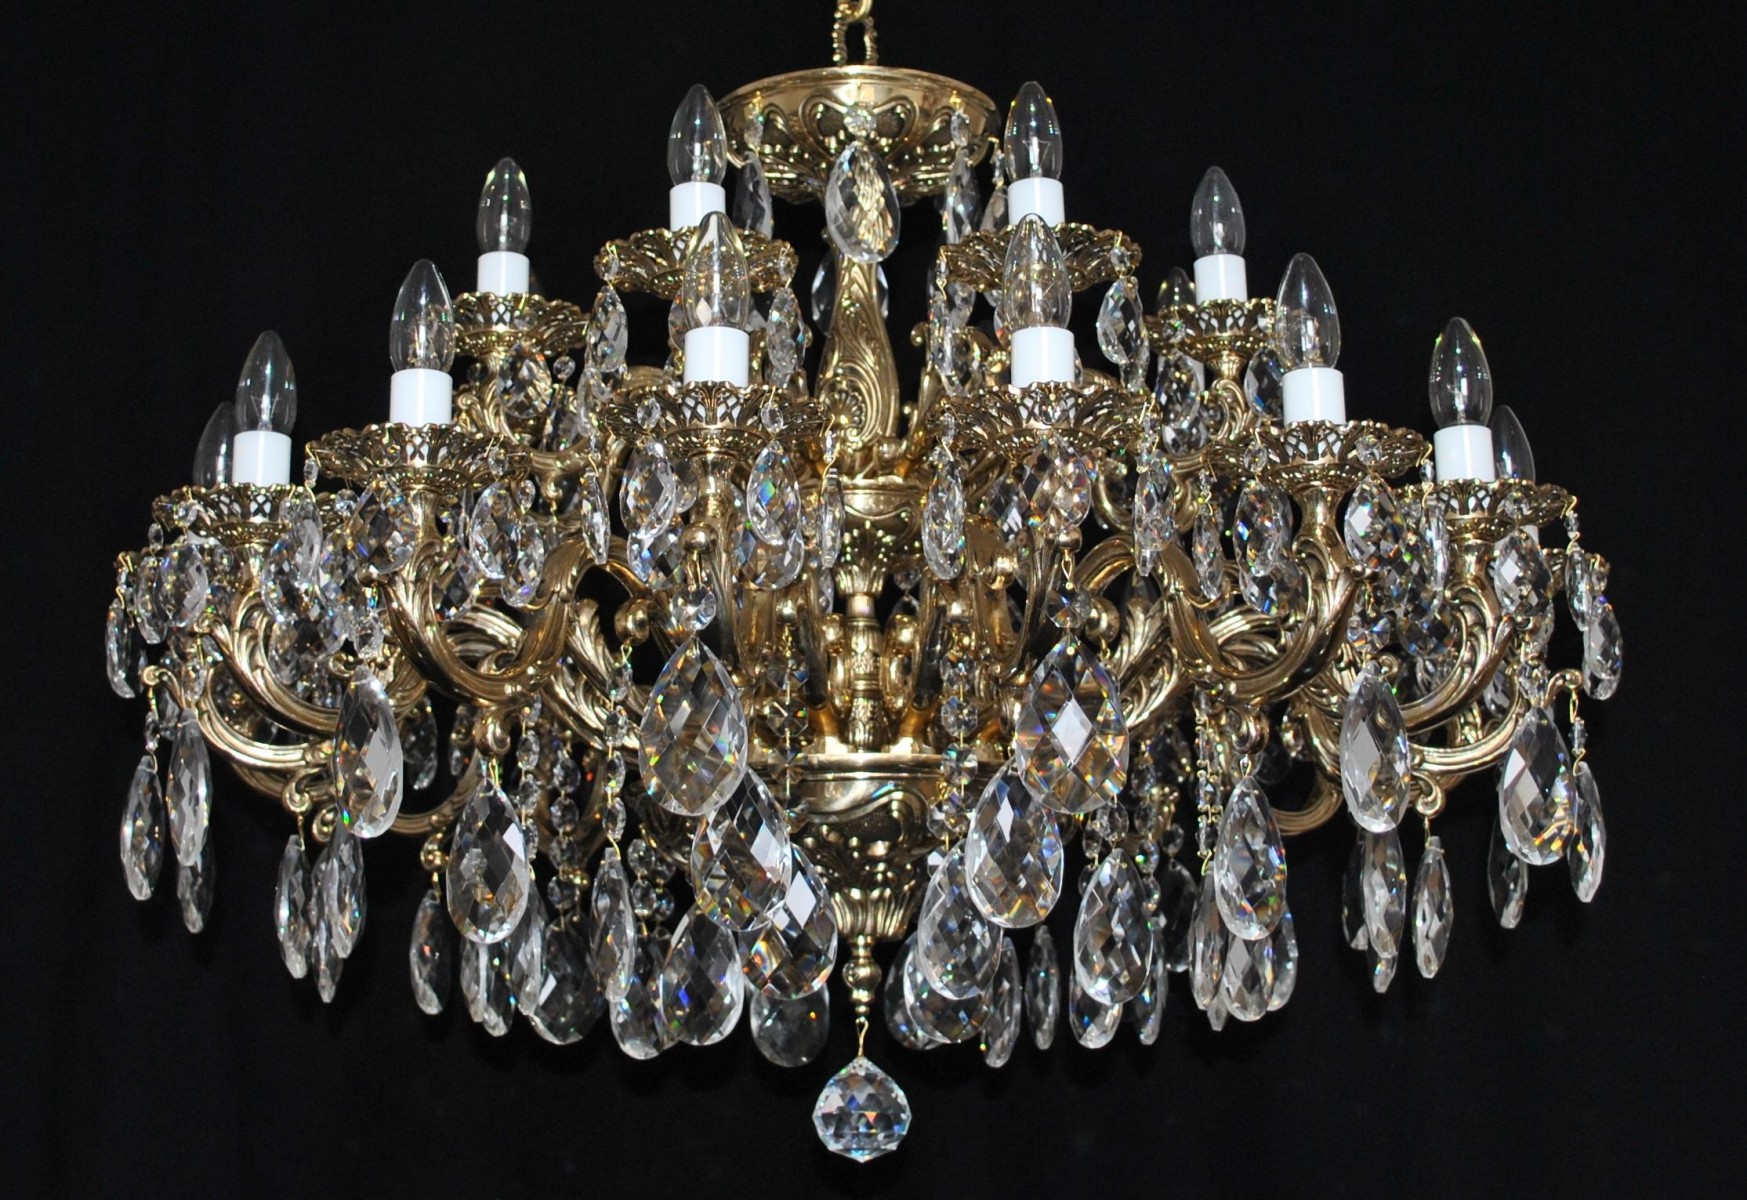 18 arms amazing luxury cast brass chandelier with cut lead crystal almonds